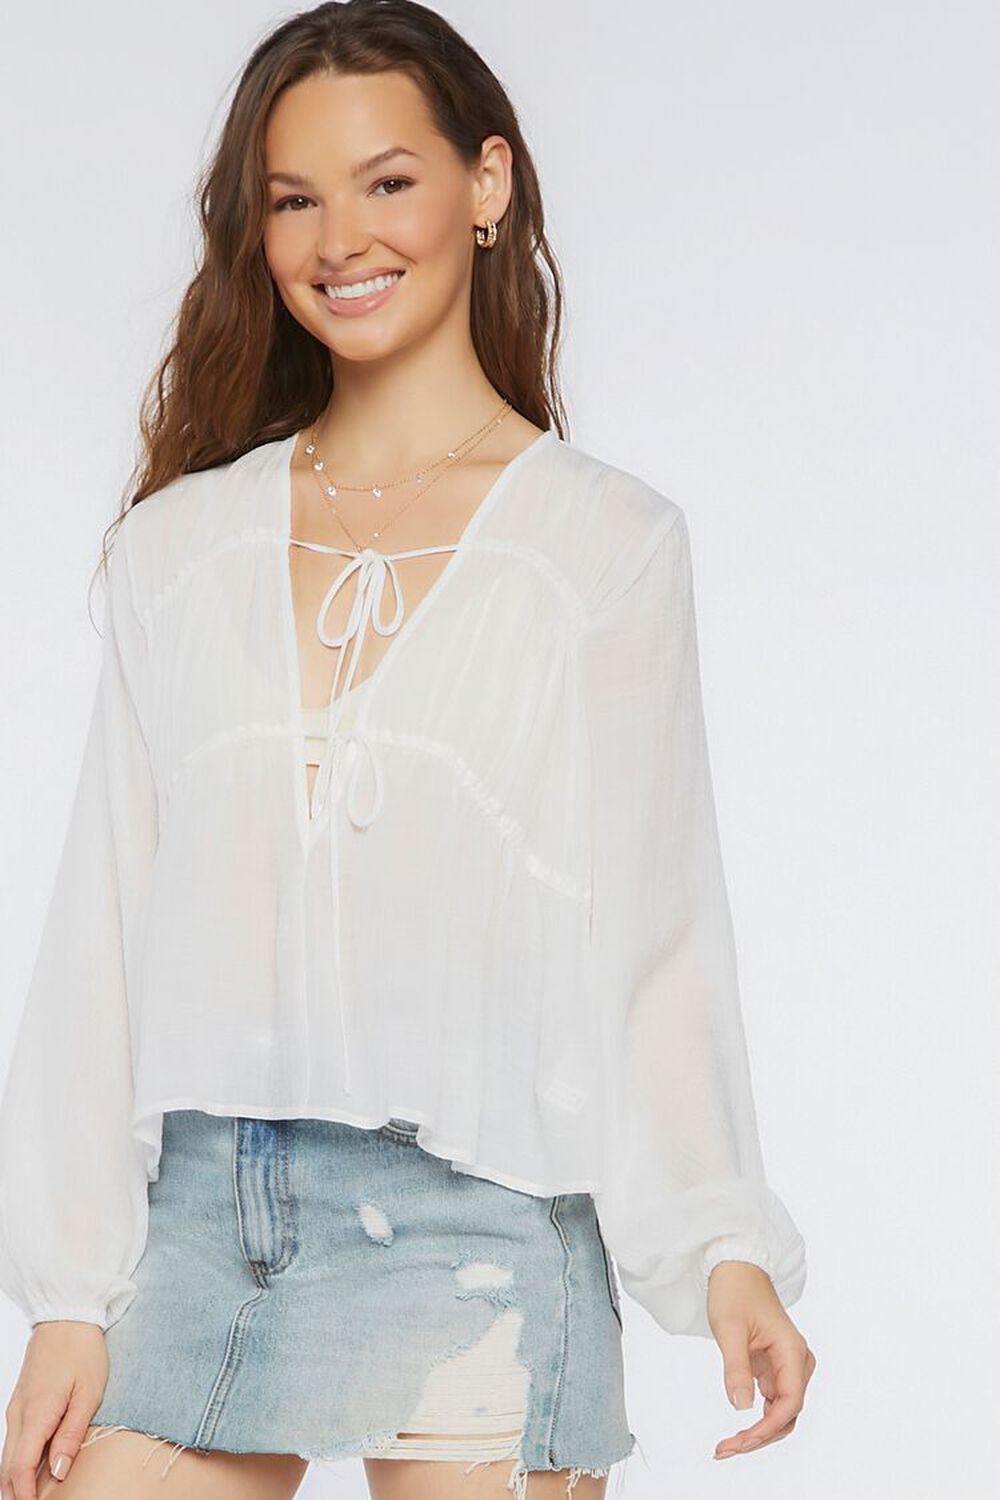 WHITE Plunging Peasant-Sleeve Top, image 1